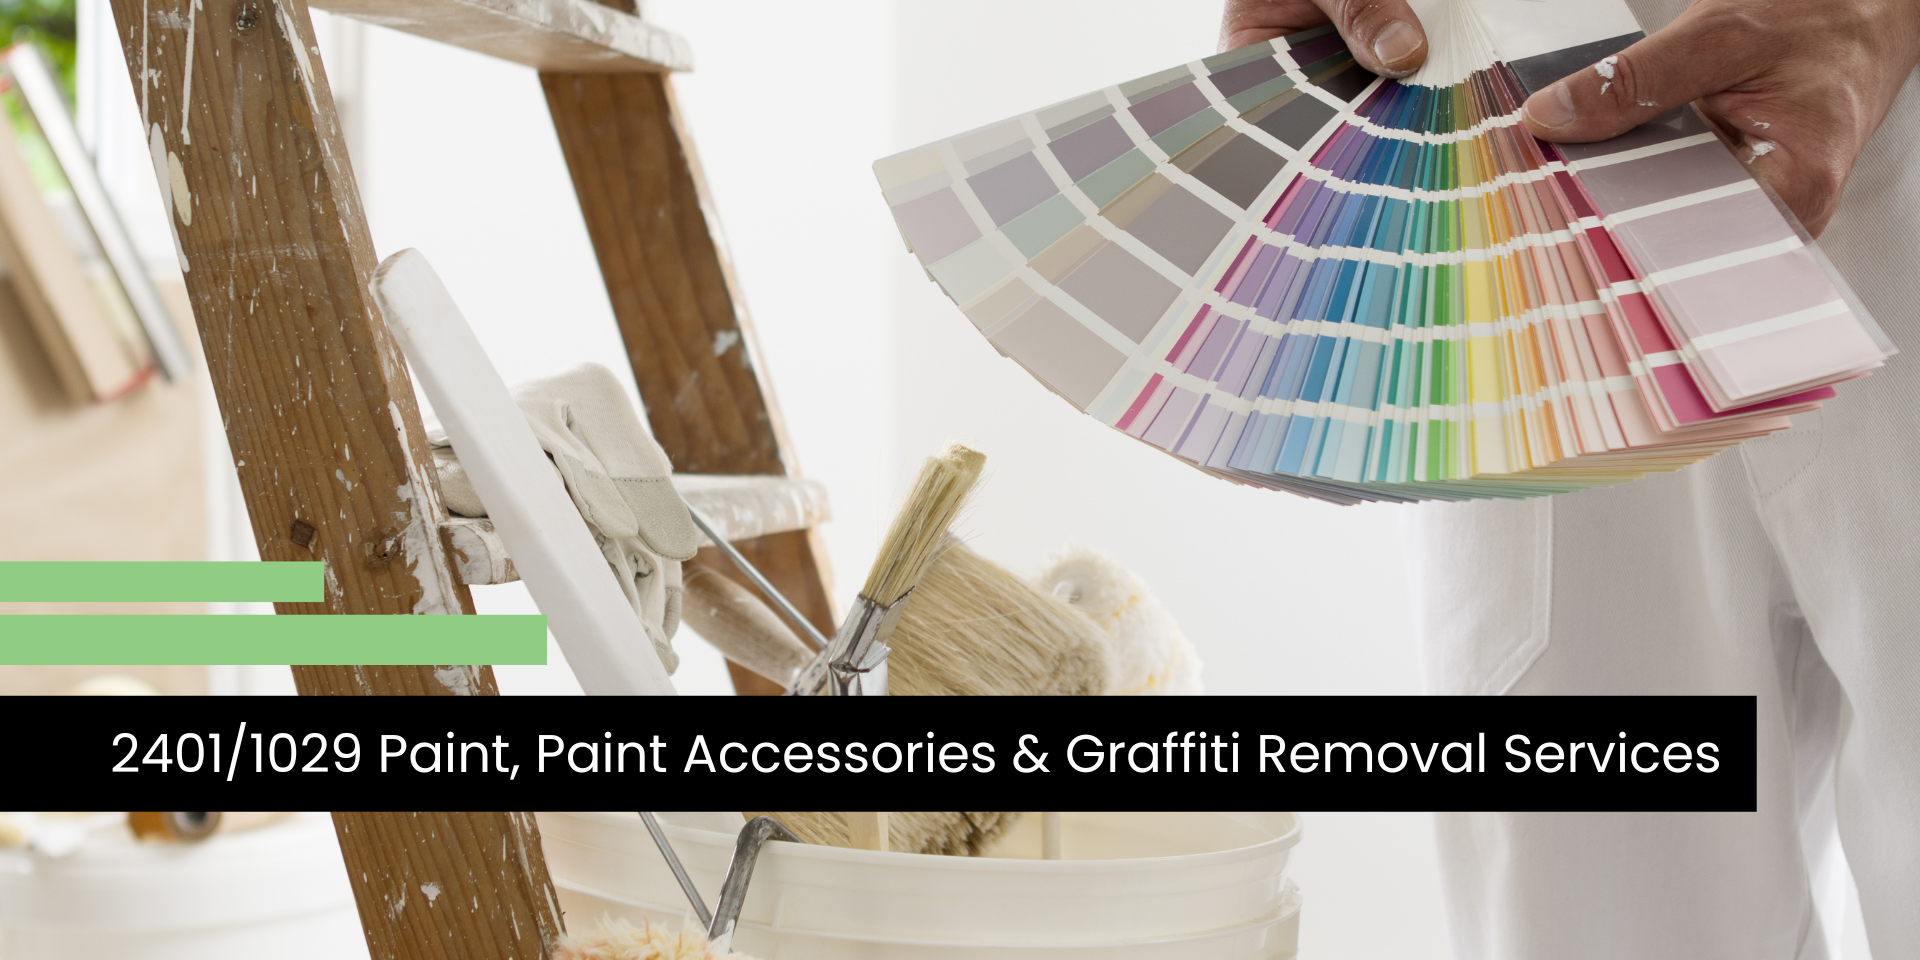 Contract Extension: 2401/1029 — Paint, Paint Accessories & Graffiti Removal Services